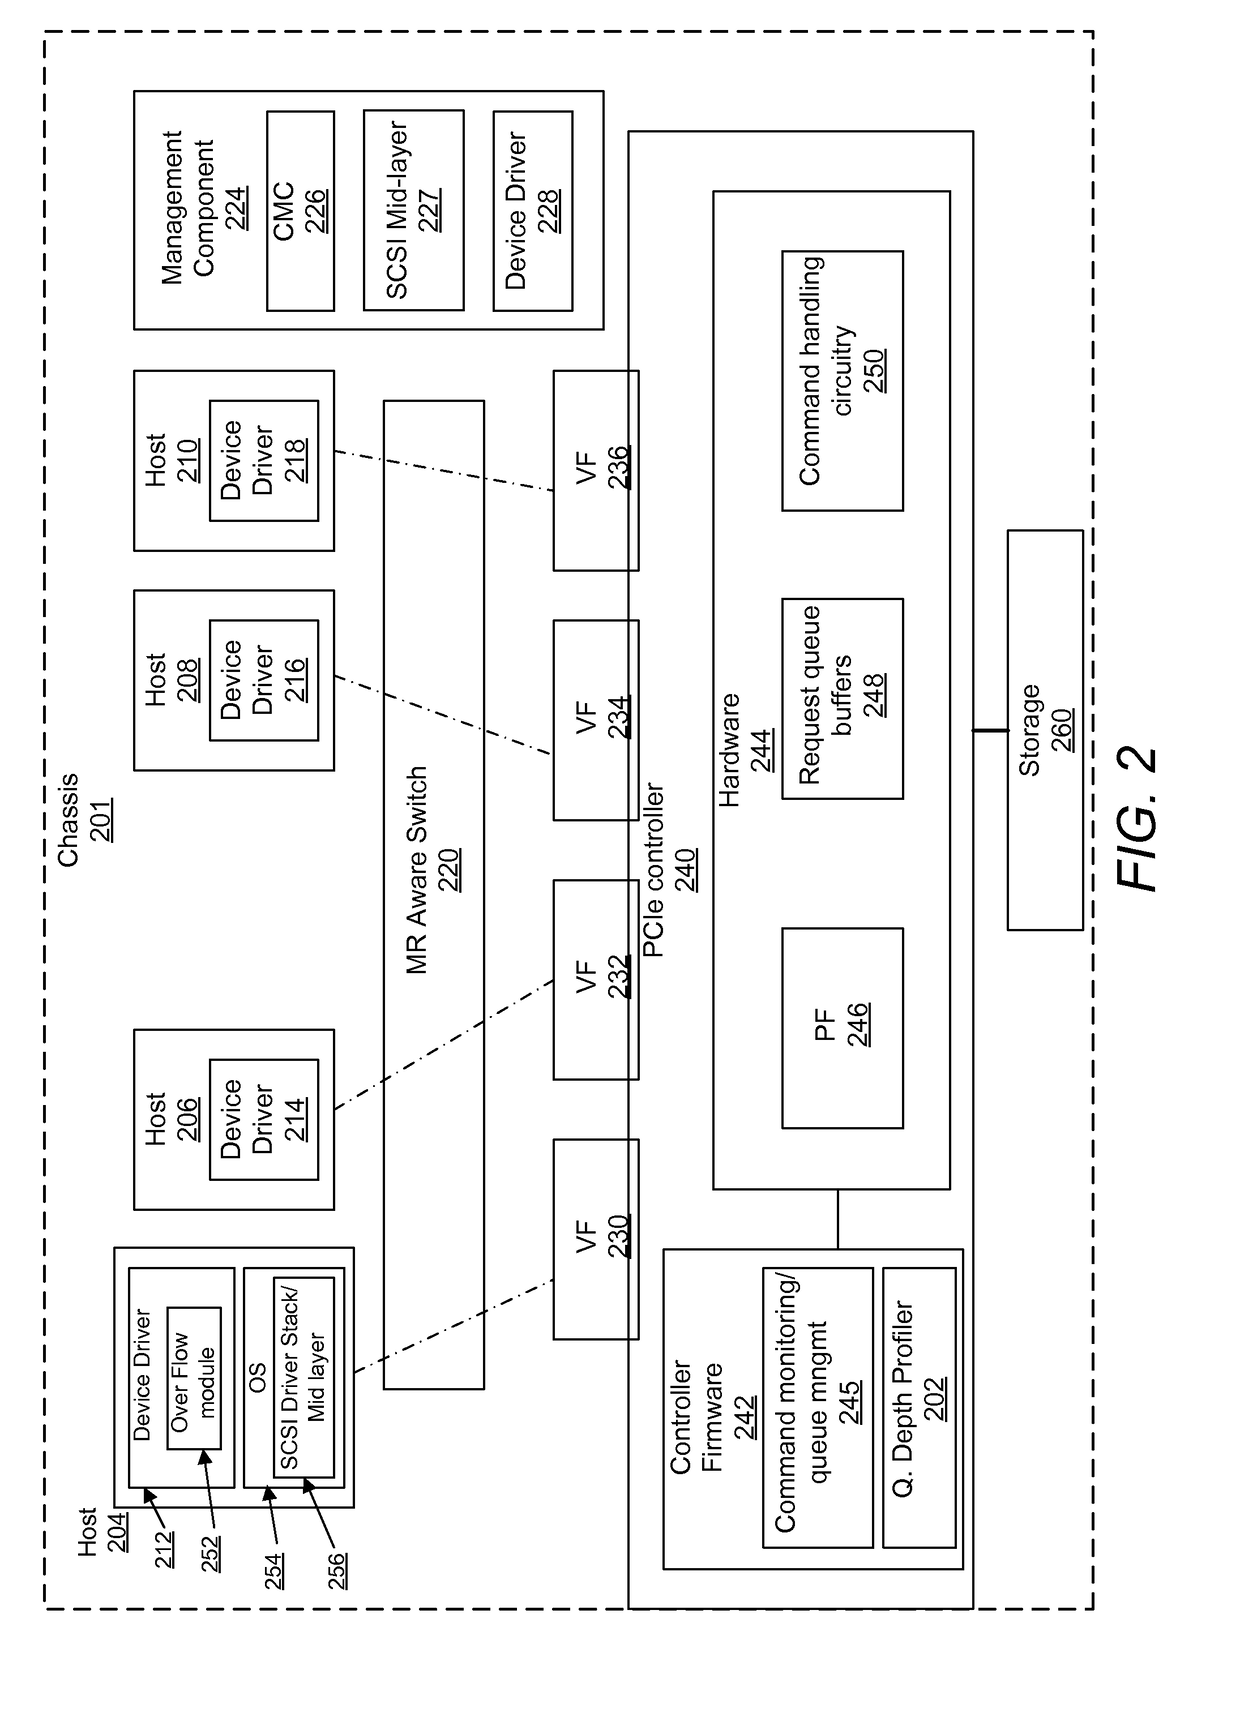 Dynamic allocation of queue depths for virtual functions in a converged infrastructure